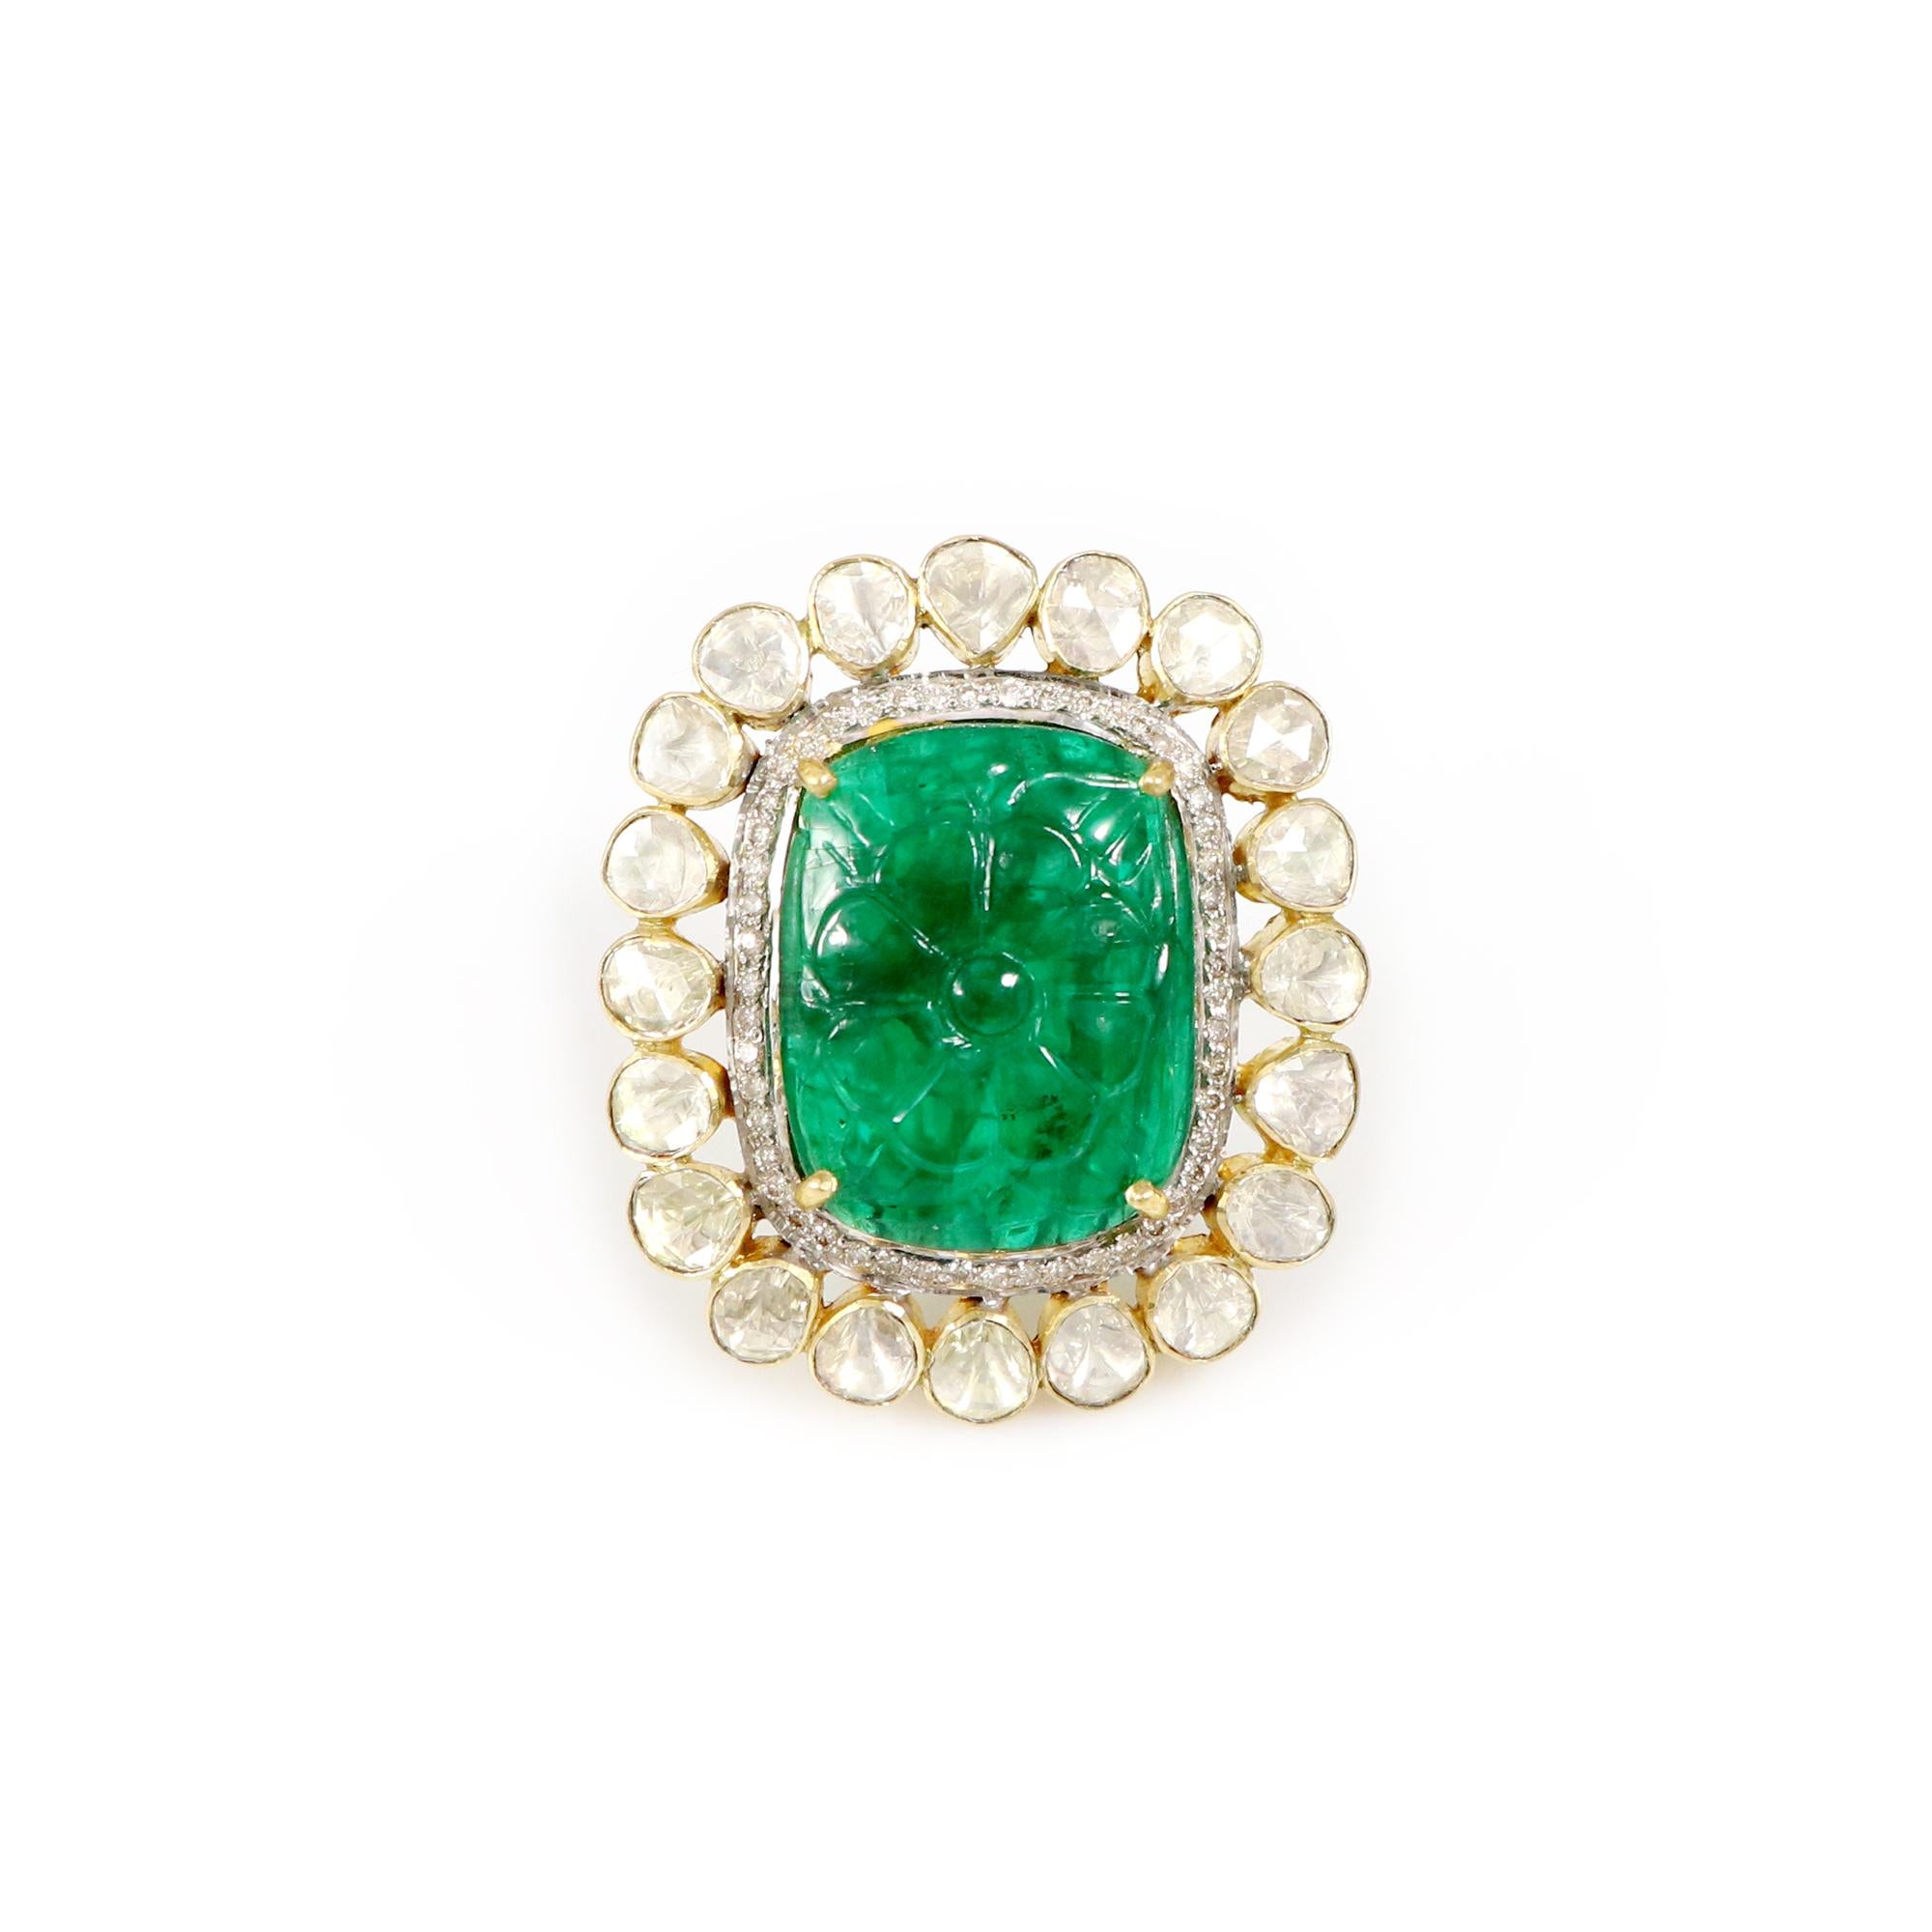 Introducing our exquisite Carved Zambian Emerald Ring, a true masterpiece of luxury and elegance. This stunning piece showcases a meticulously hand-carved Zambian emerald, encircled by uncut diamonds, elegantly set in 18K yellow gold. This creation